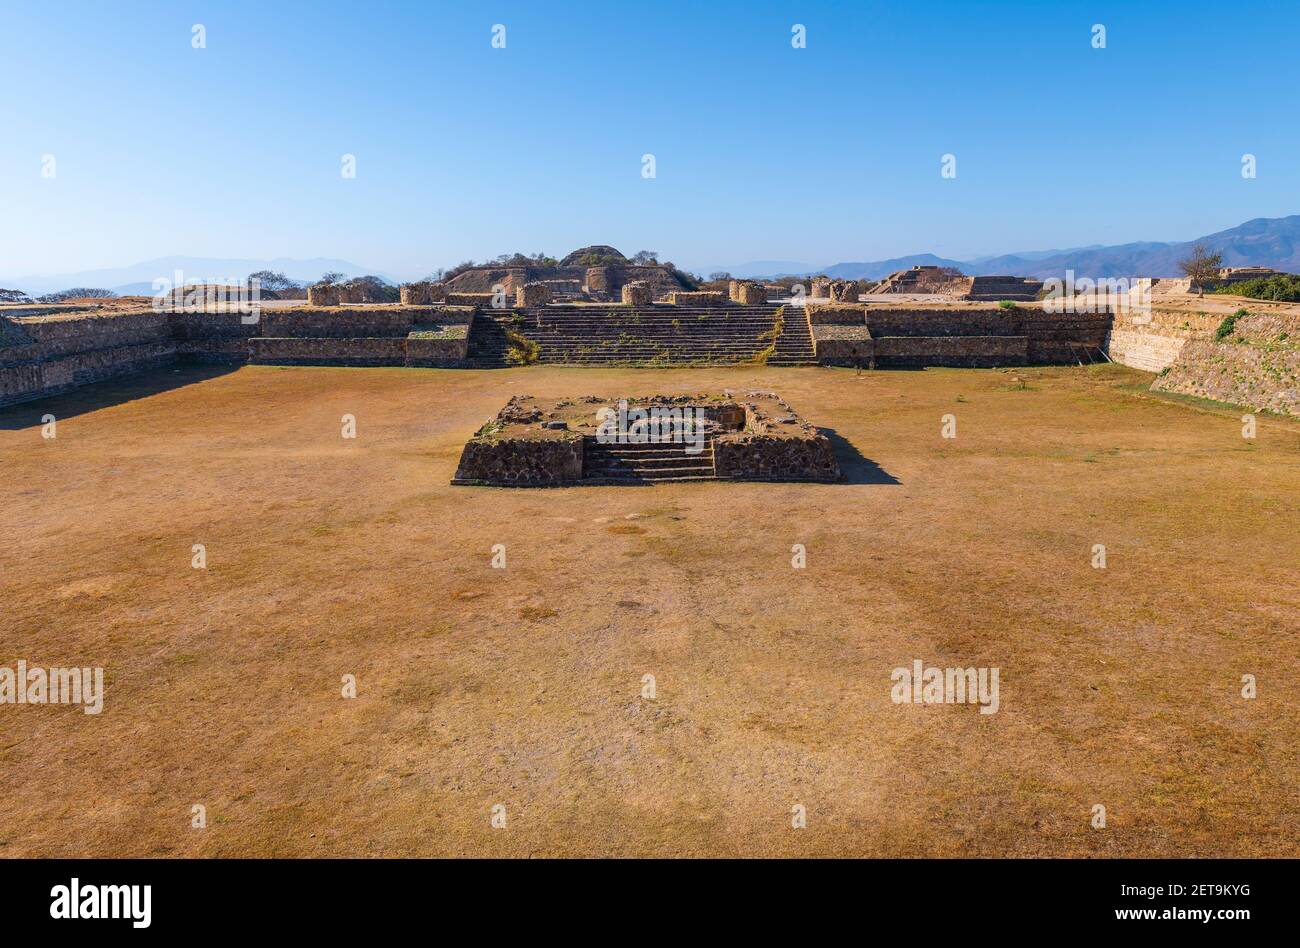 Main square of Zapotec site of Monte Alban with copy space, Oaxaca, Mexico. Stock Photo